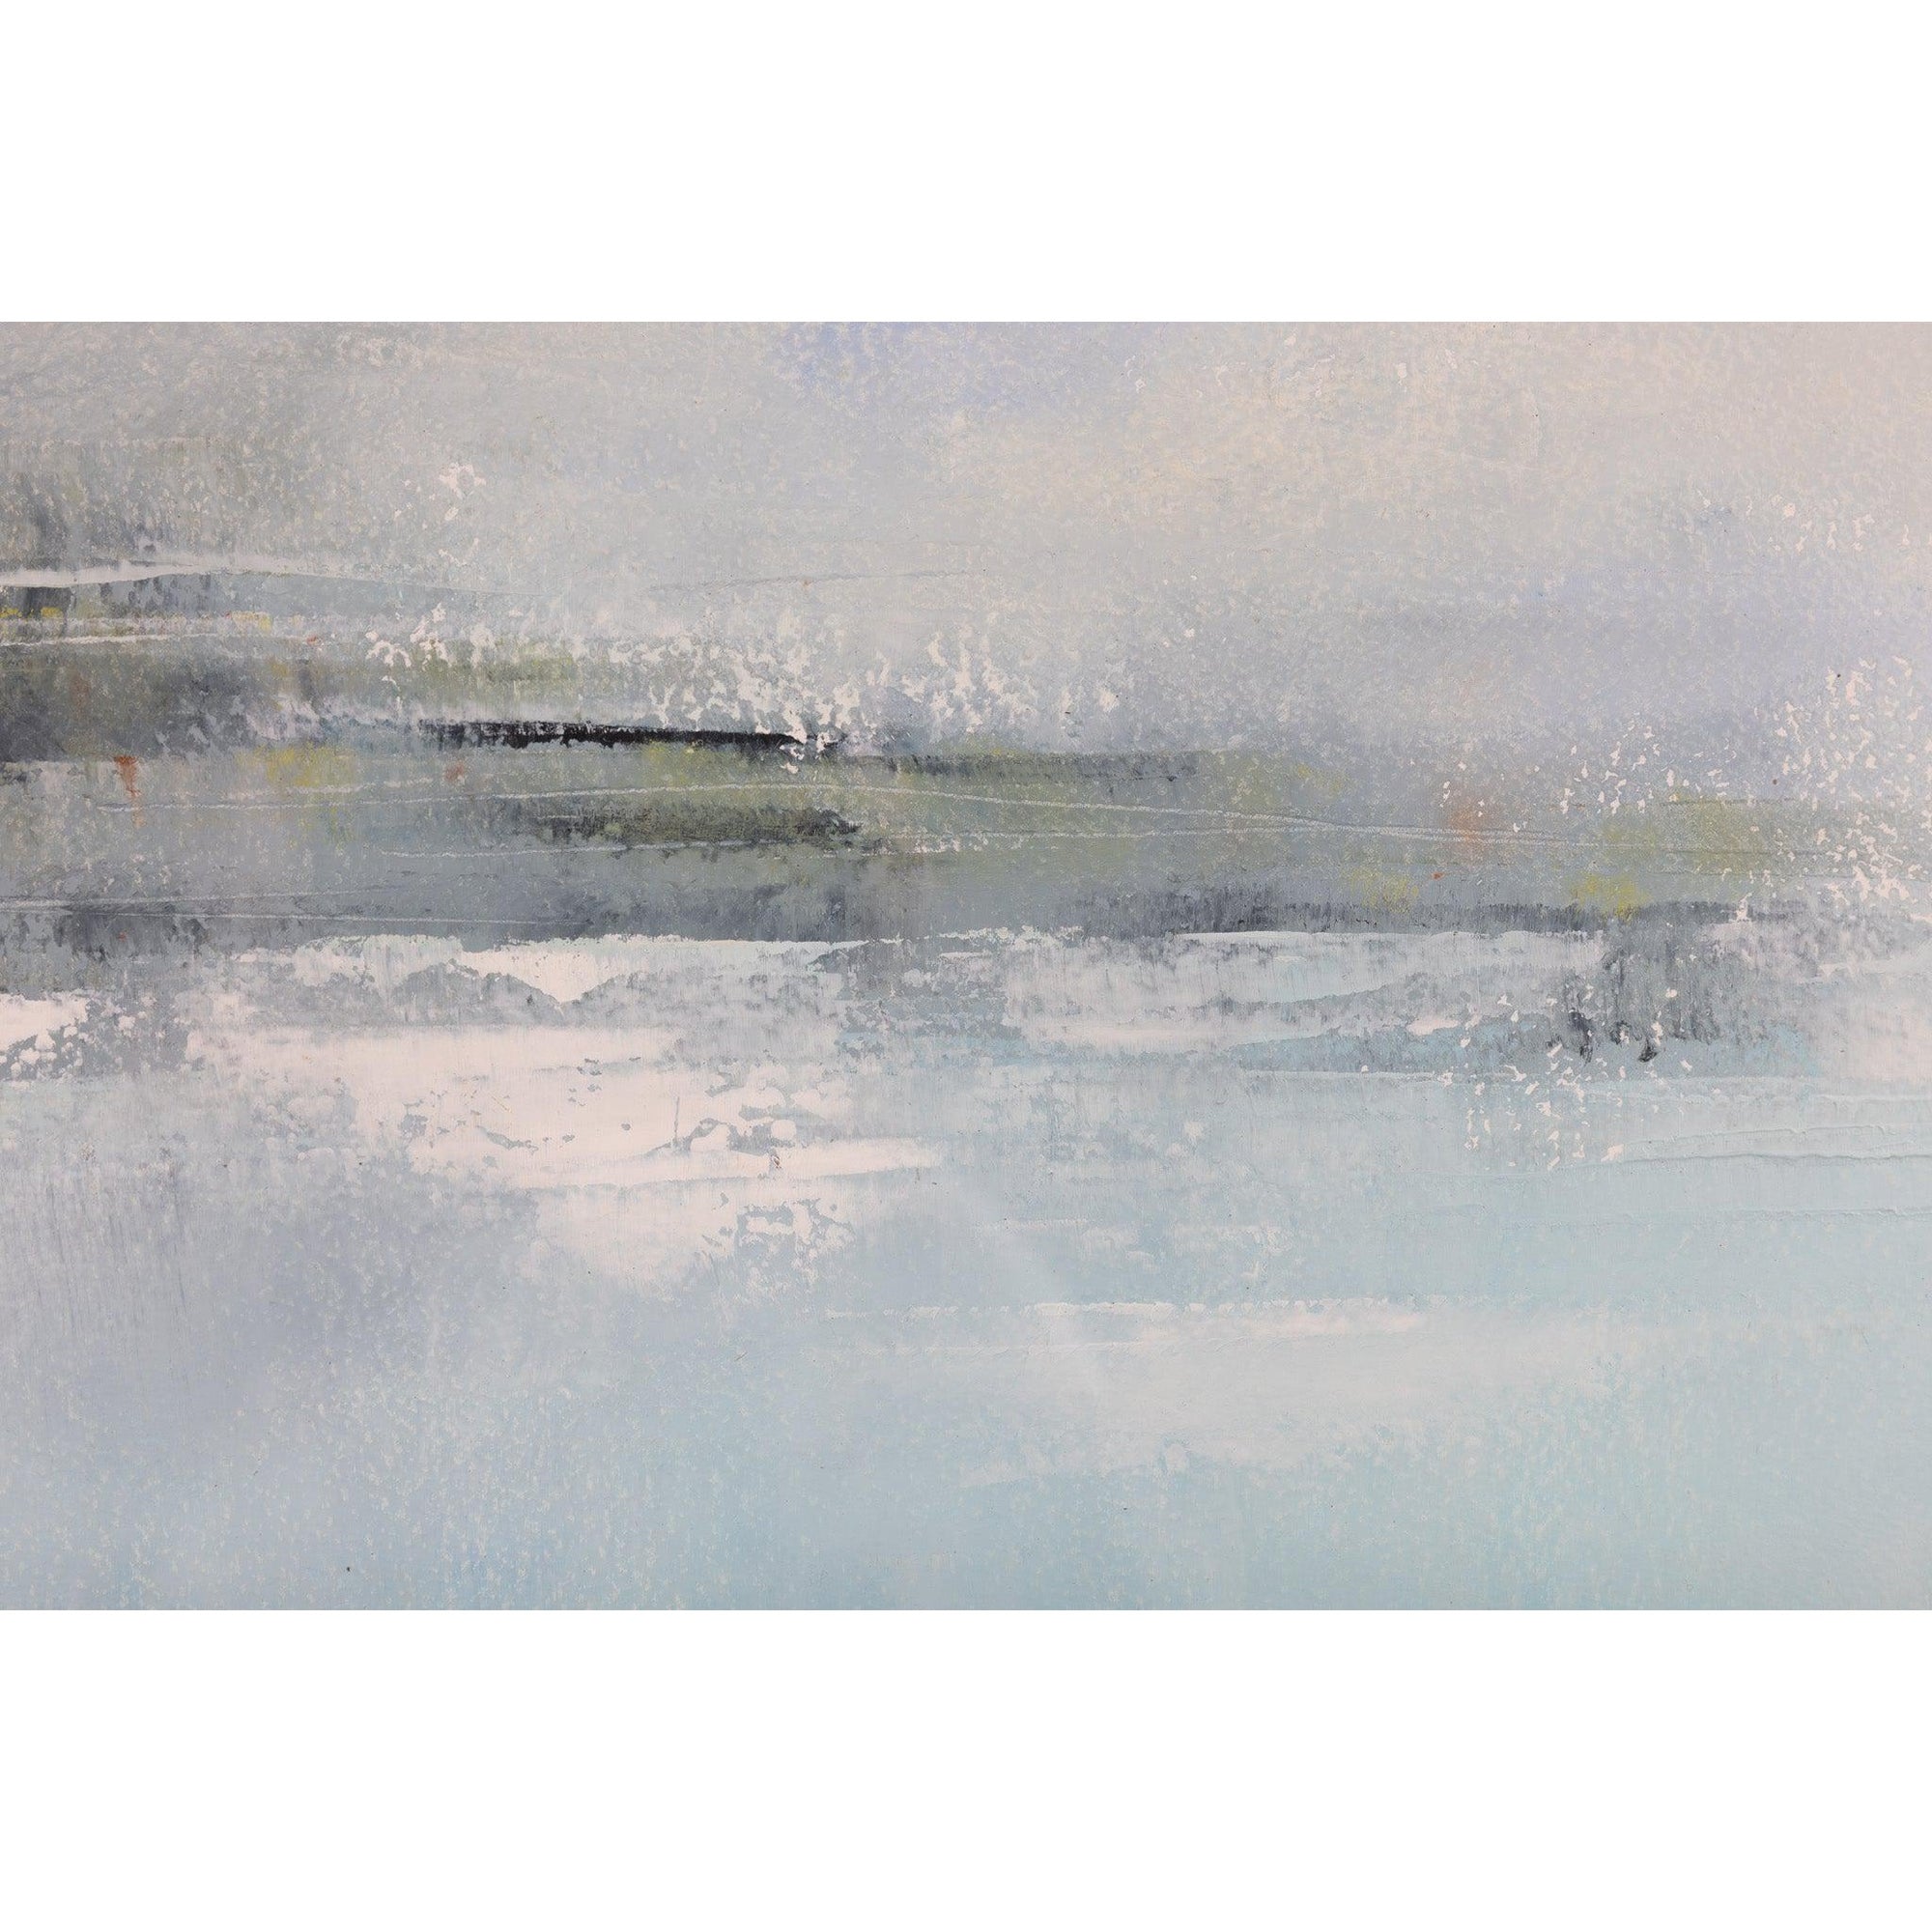 'Over the River' oil on paper by Ben Lucas, available at Padstow Gallery, Cornwall